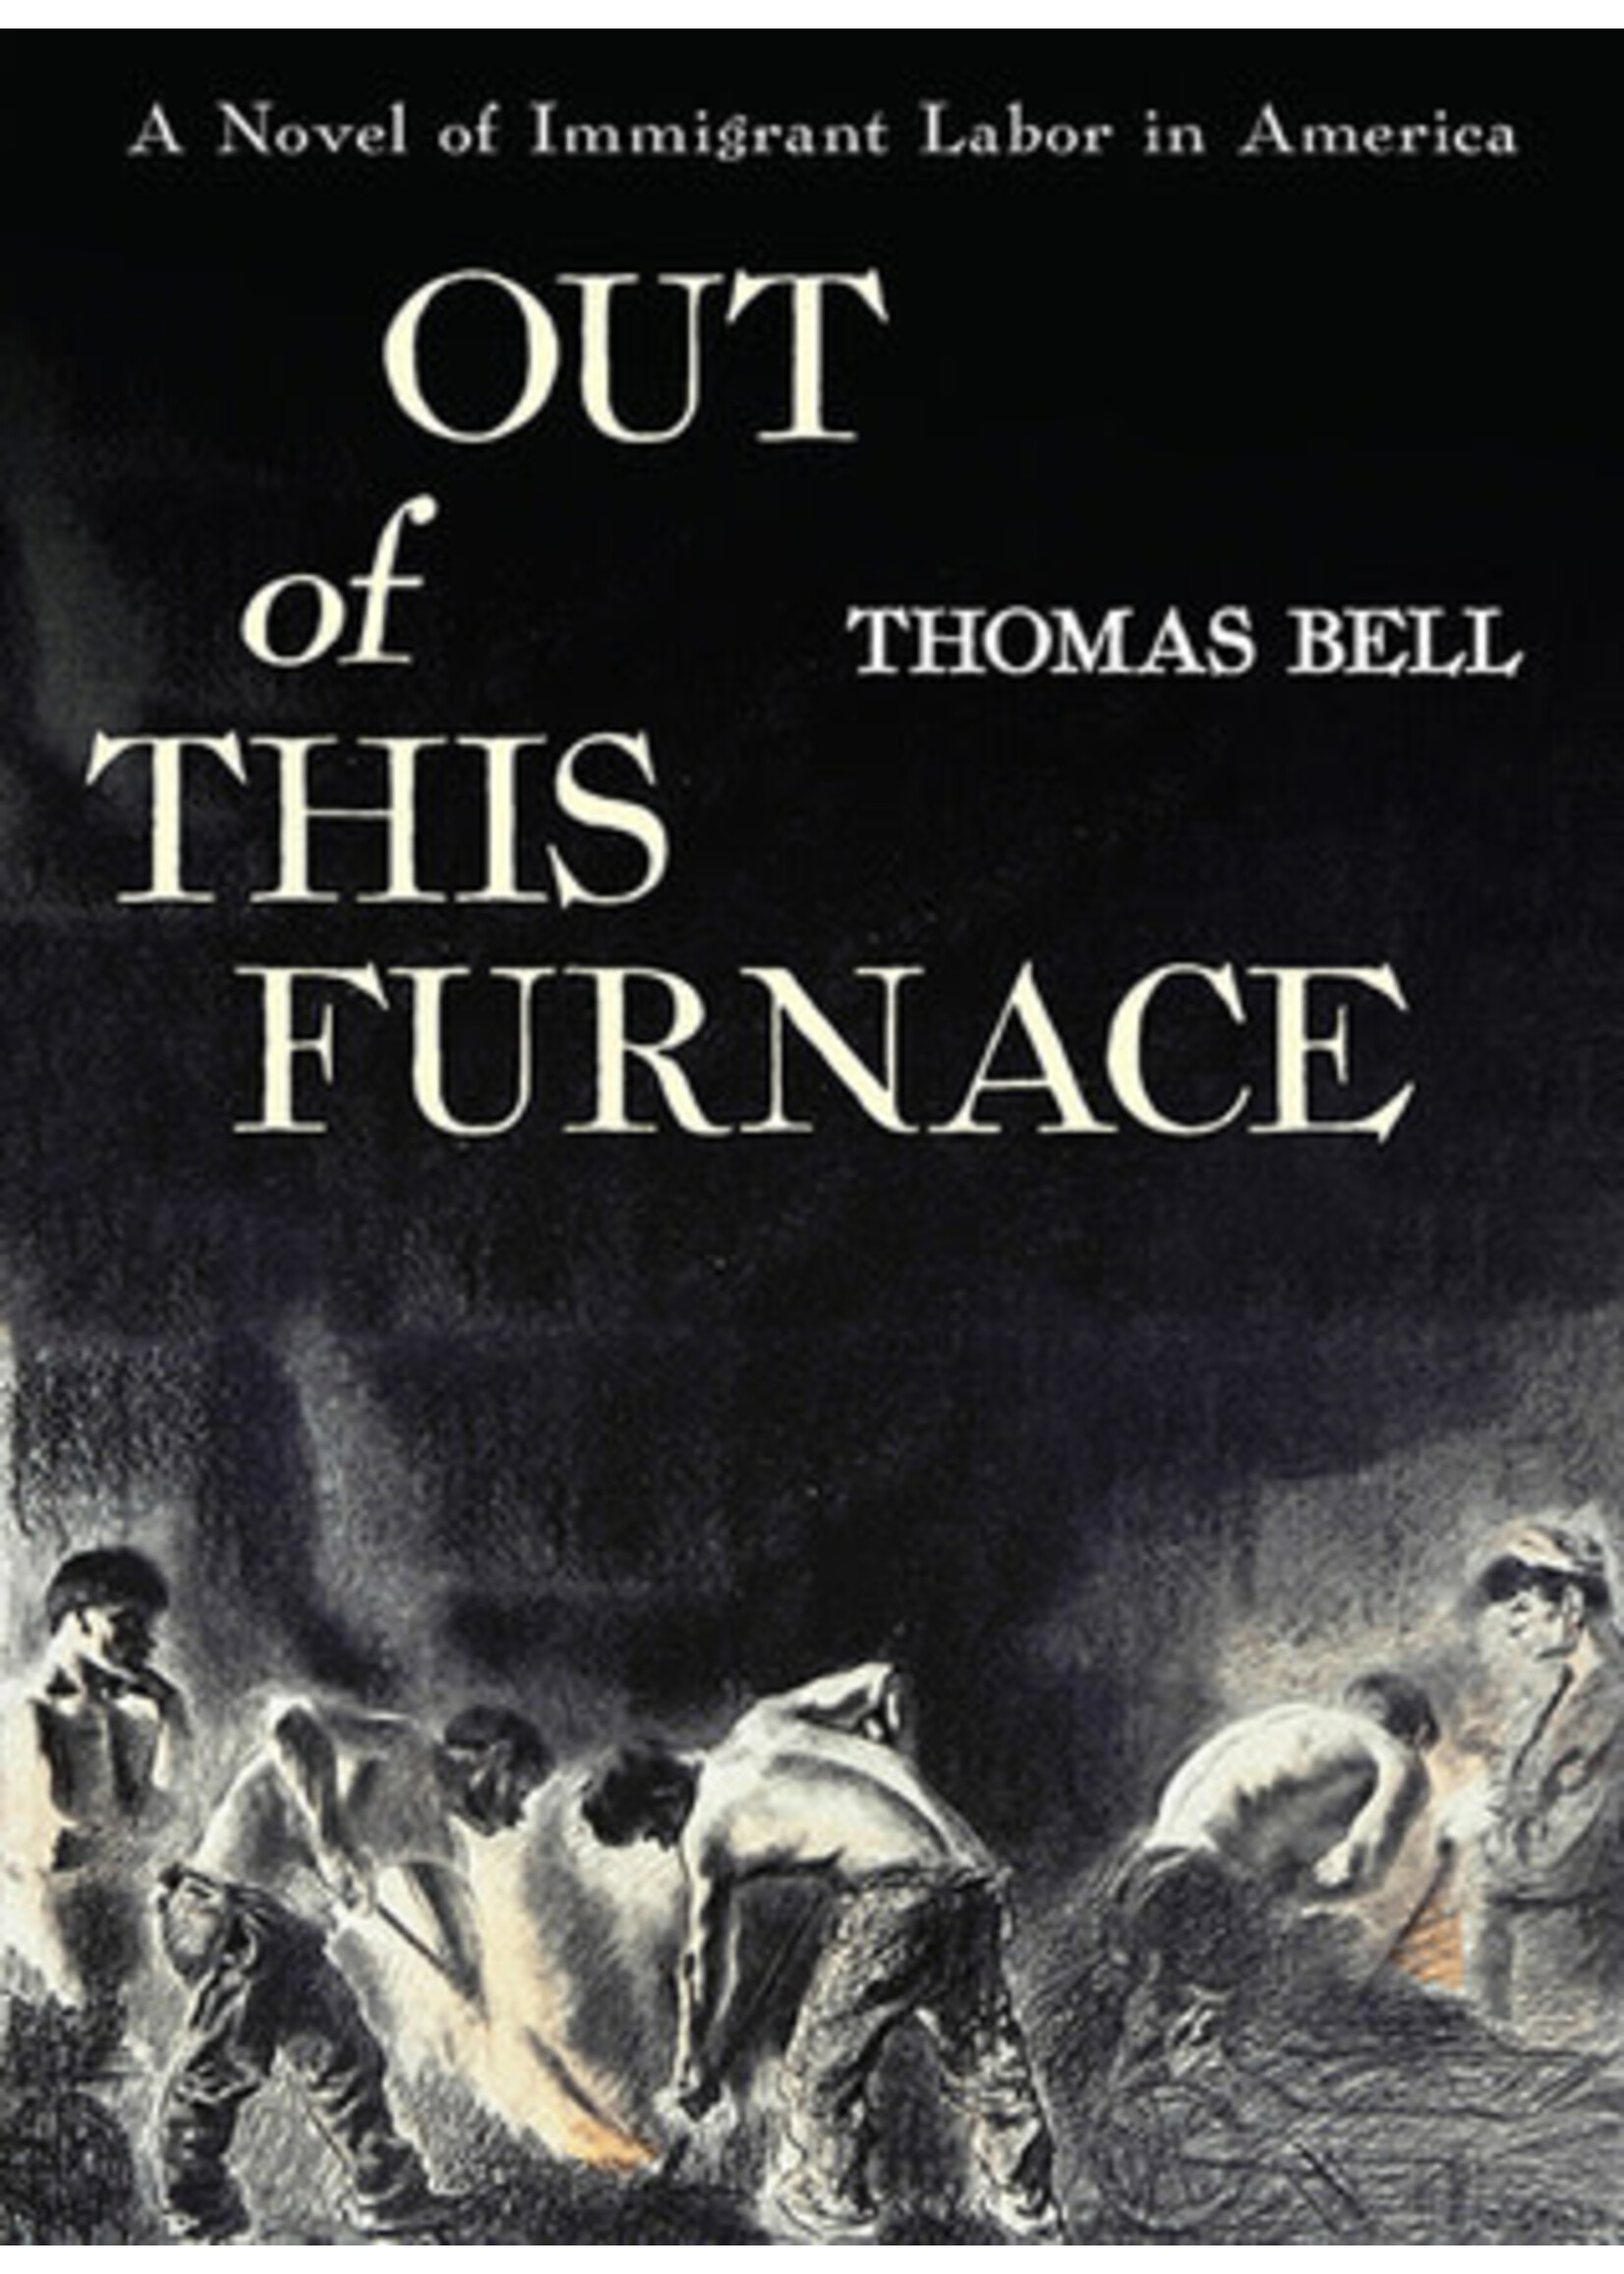 Out of This Furnace by Thomas Bell